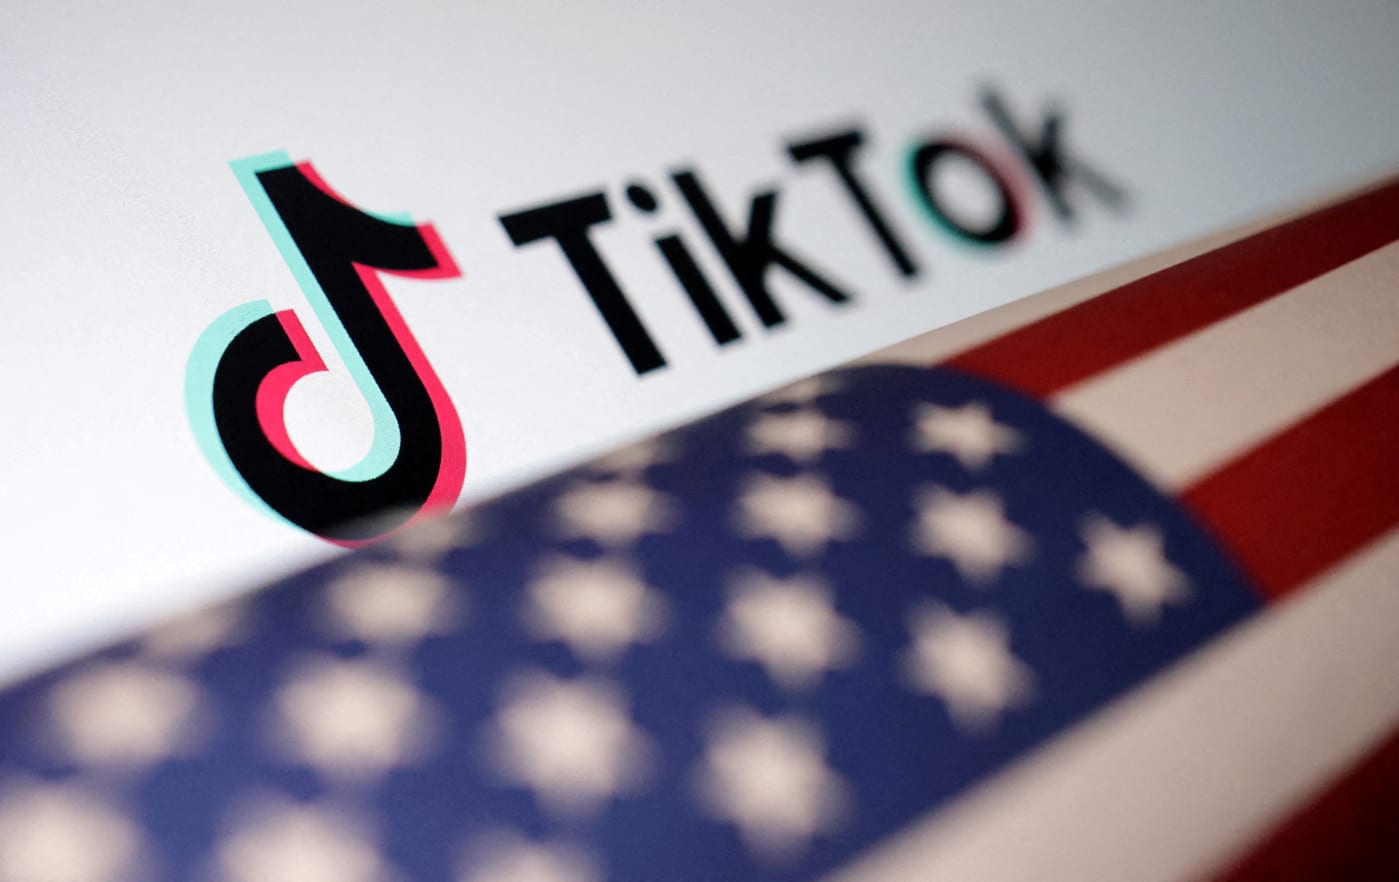 House votes in favor of bill that could ban TikTok and sends it to the Senate